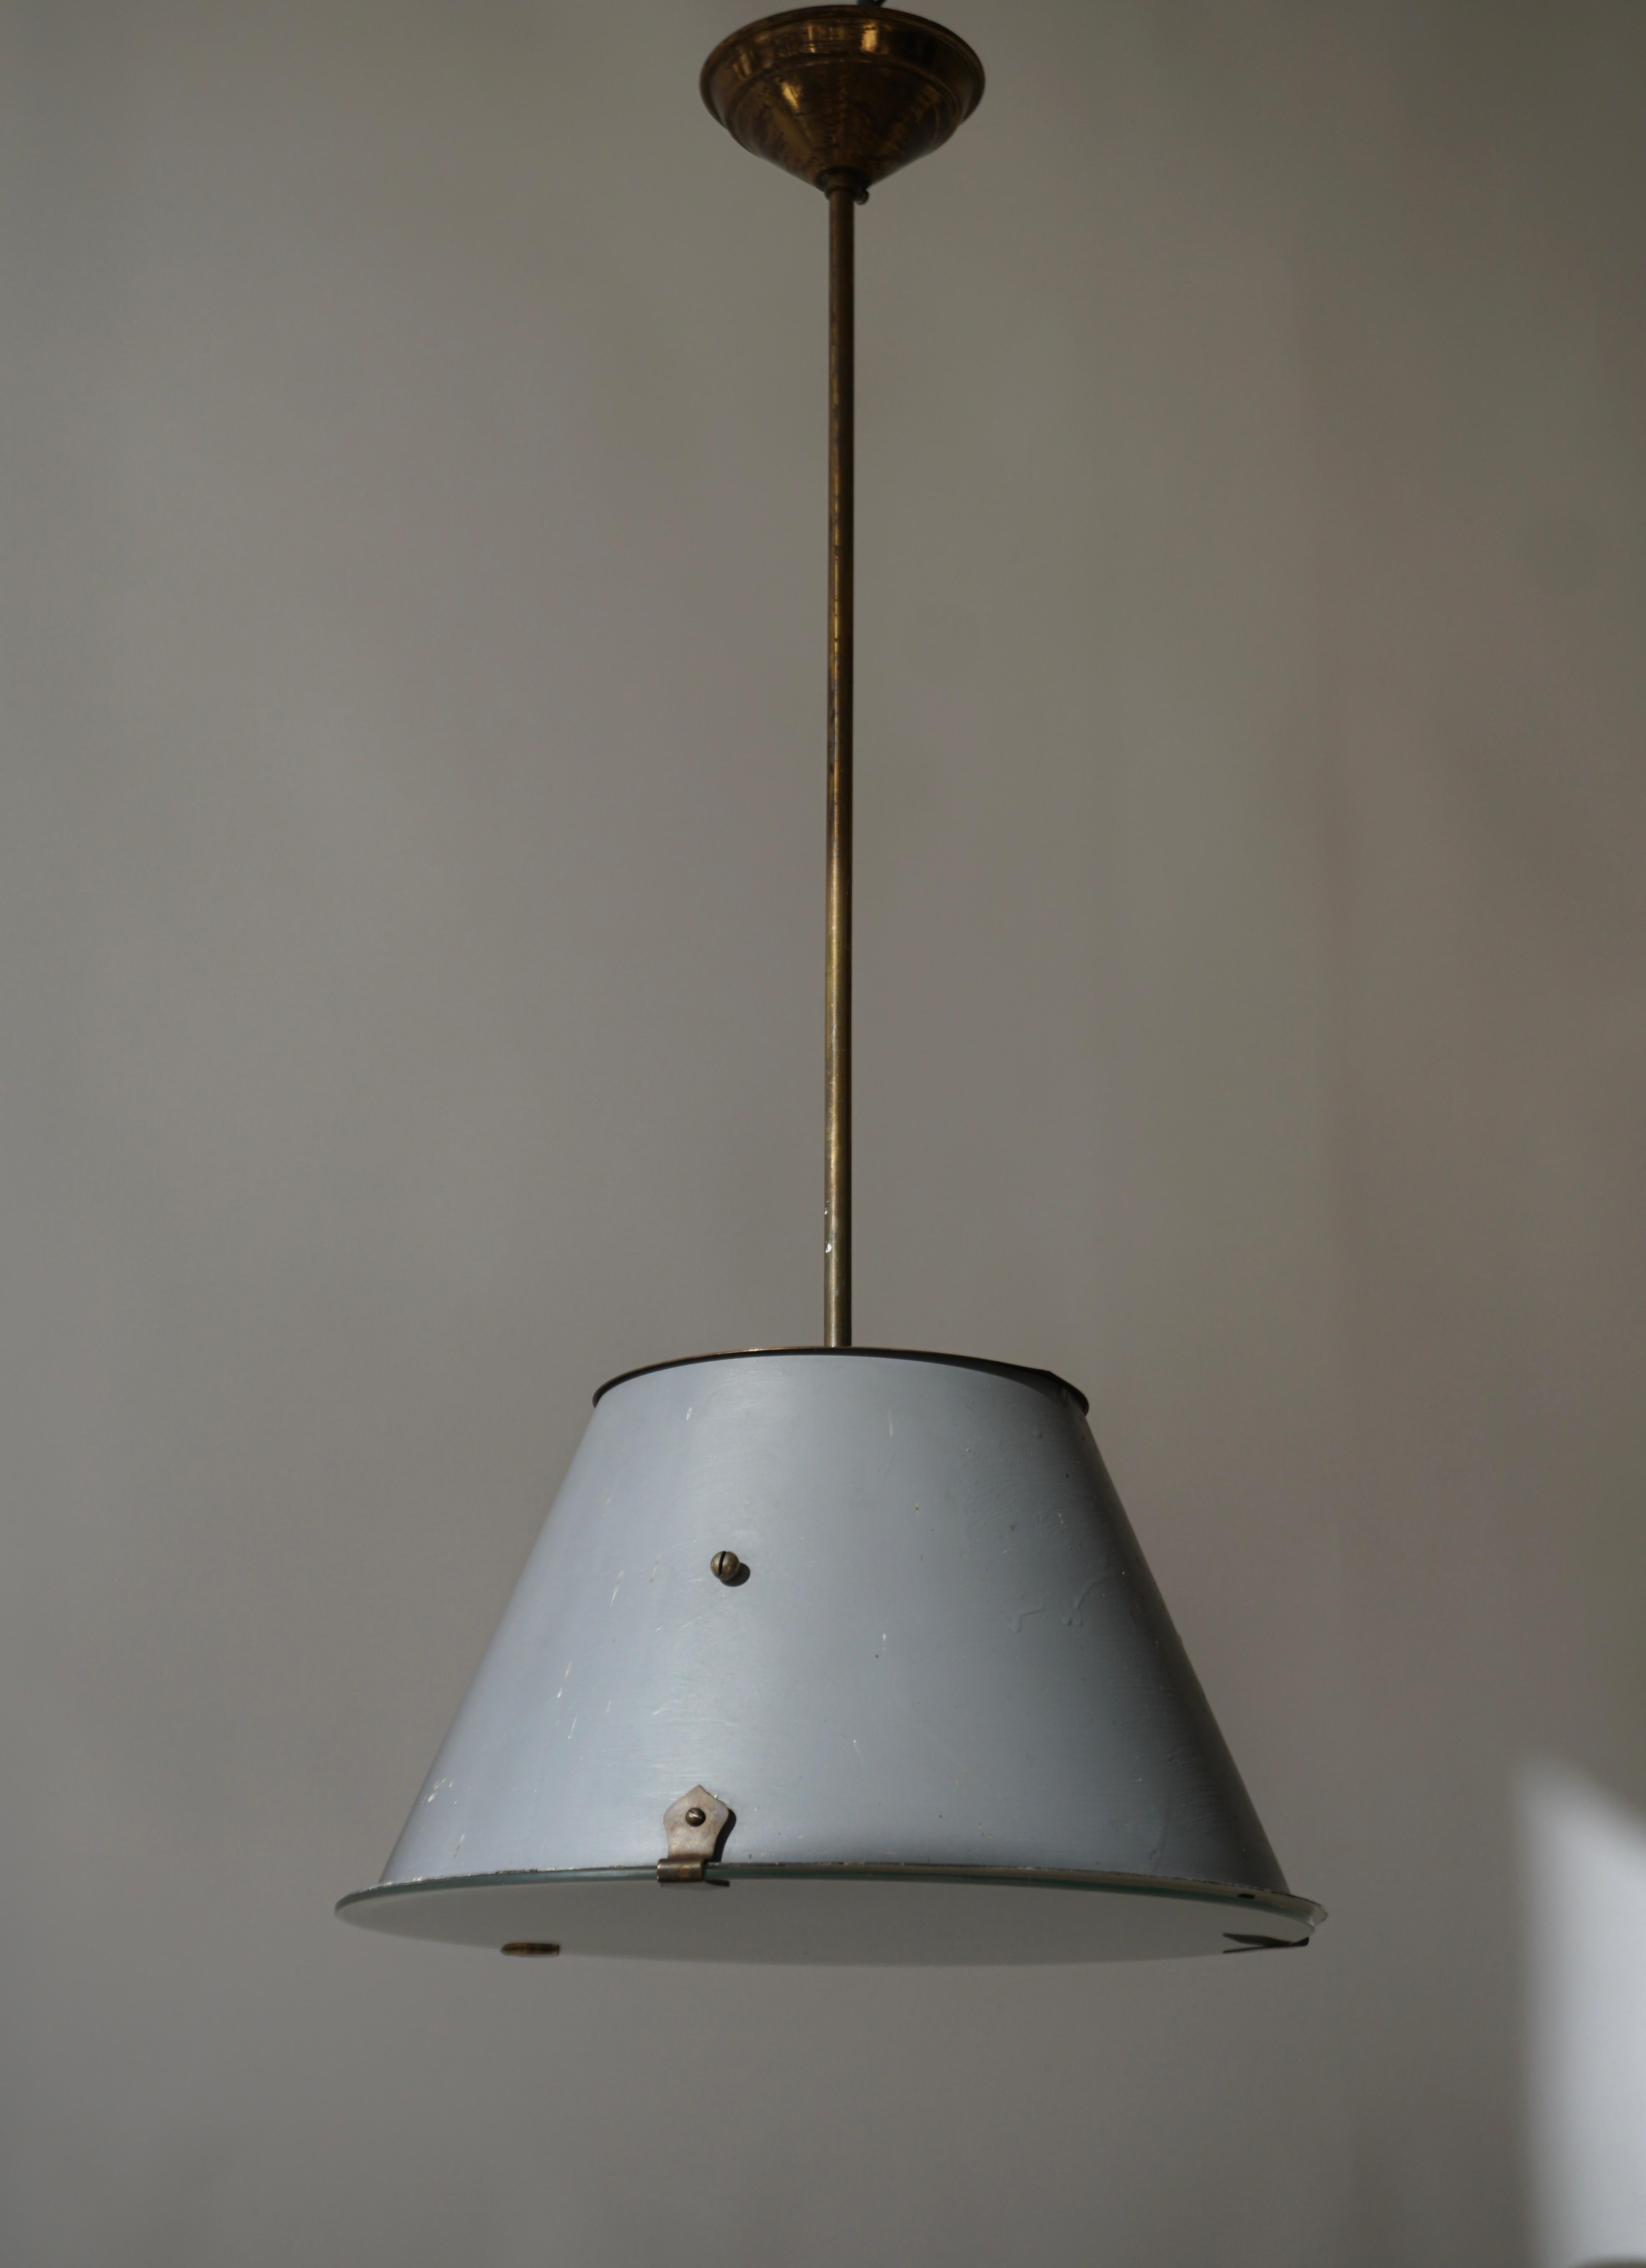 Three Industrial Art Deco Pendant Lights in Brass and Glass For Sale 2